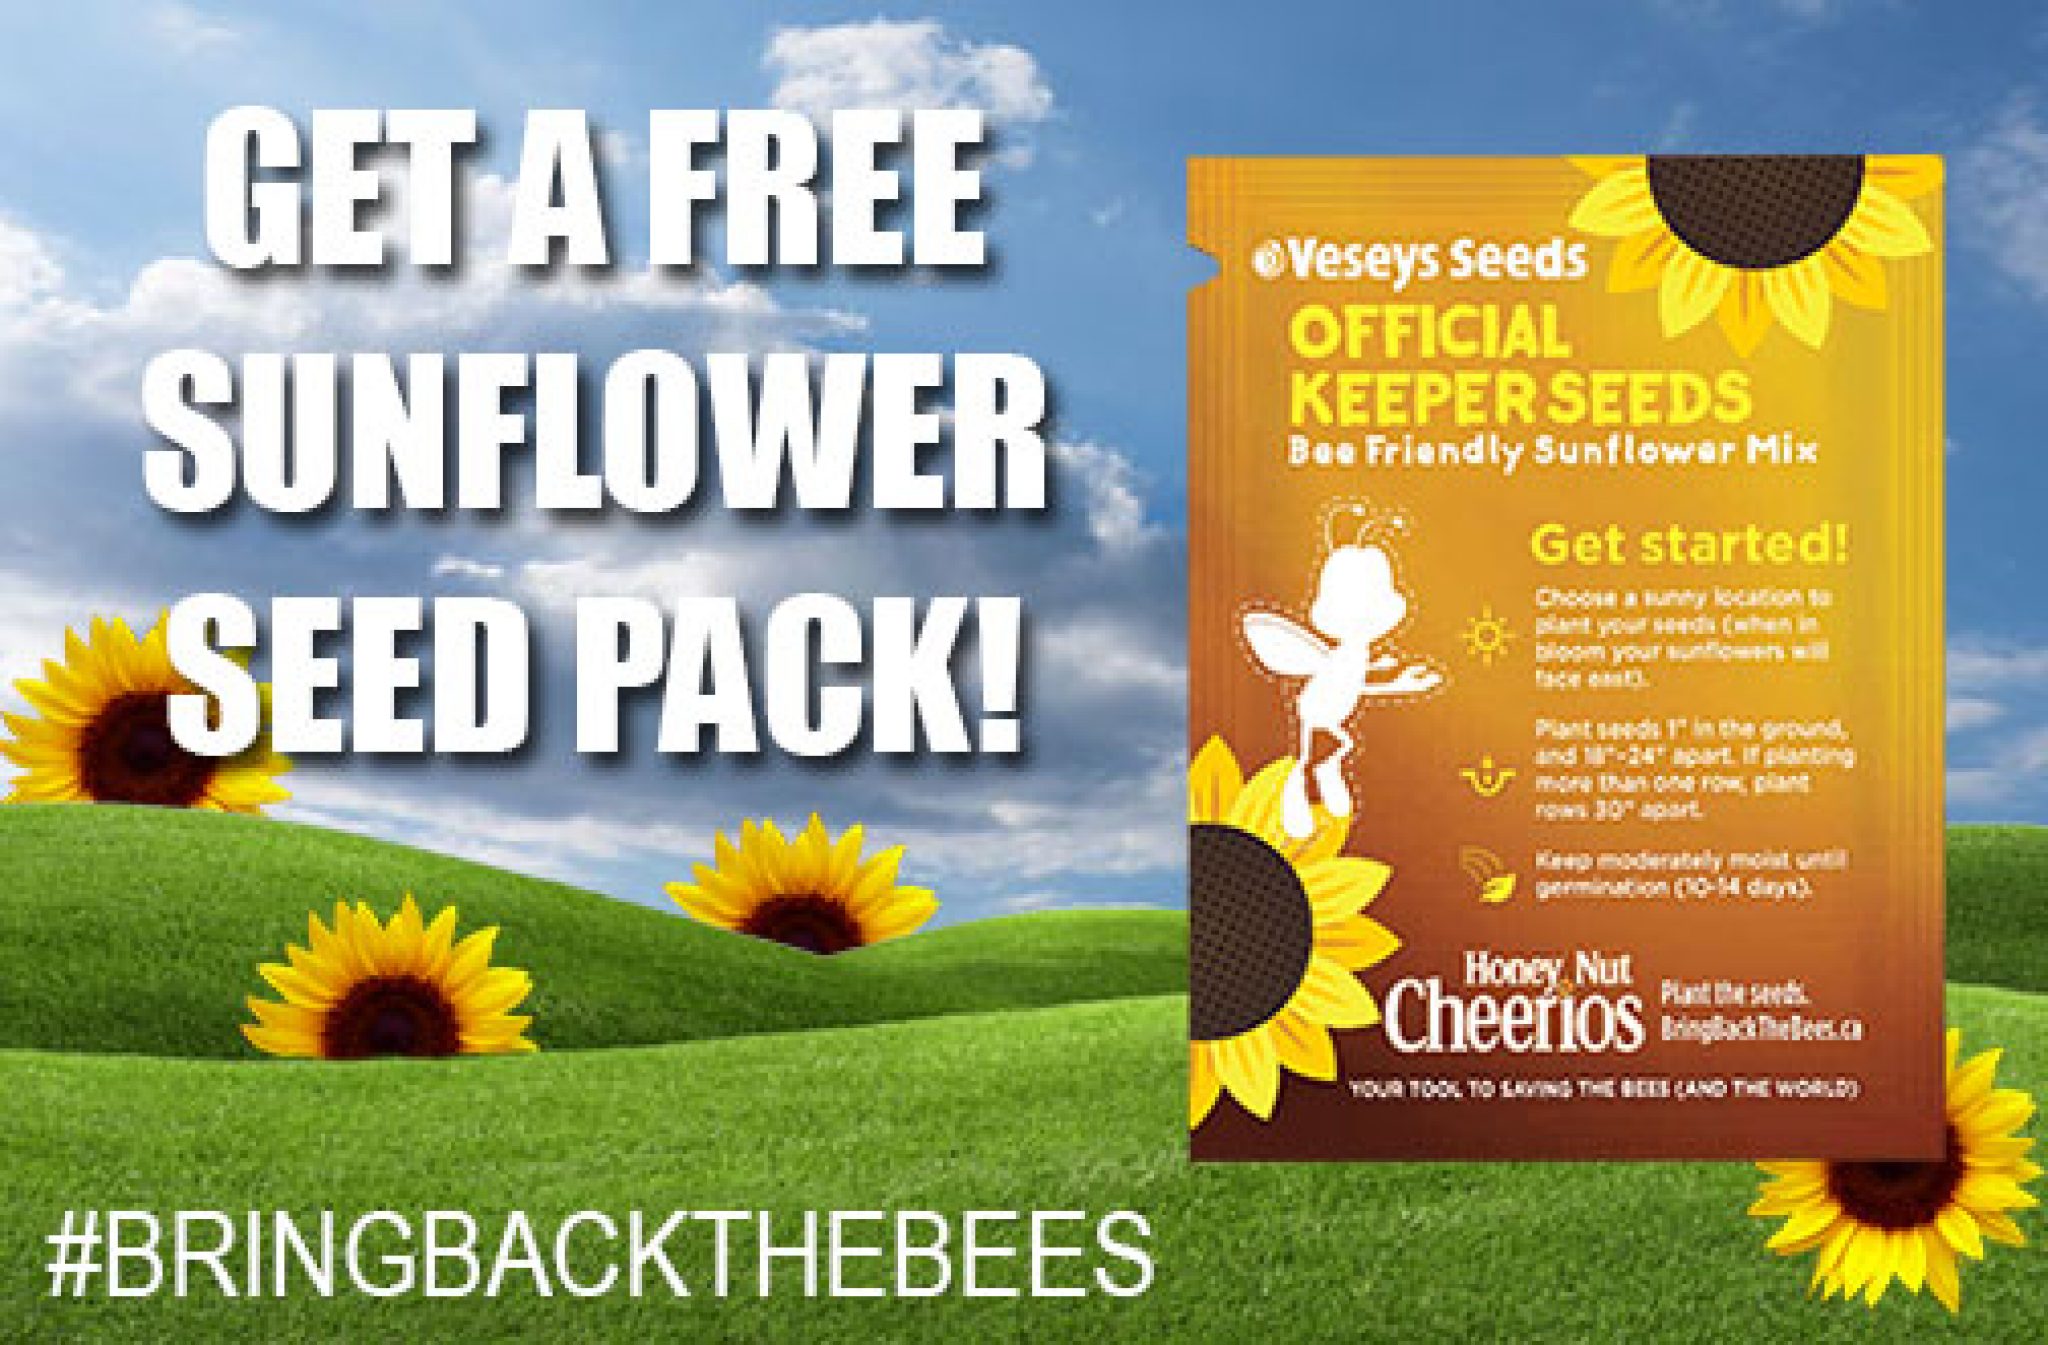 Cheerios Bring Back the Bees | Free Sunflower Seeds — Deals from ...